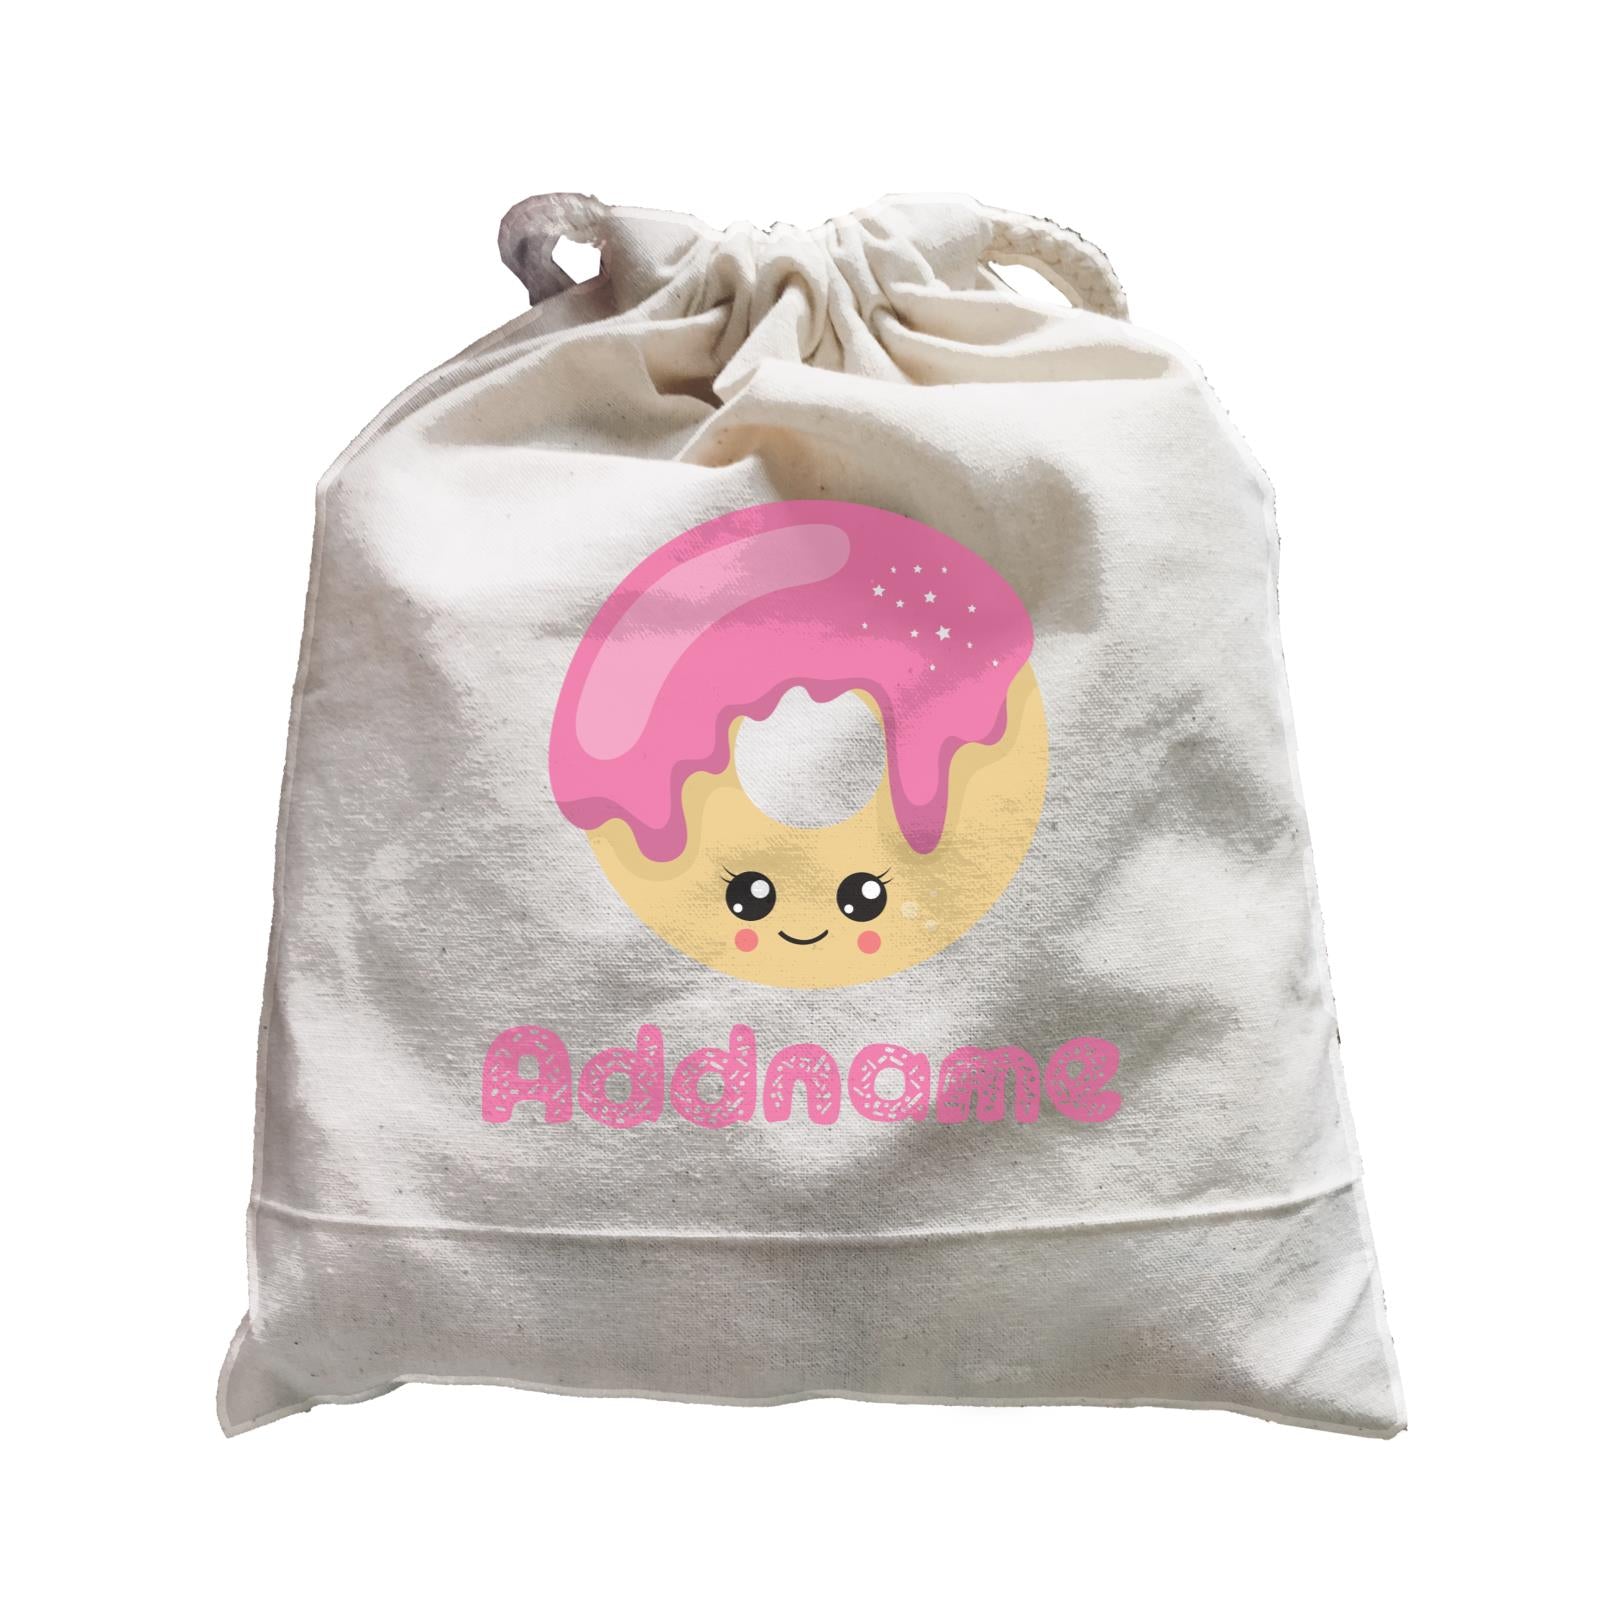 Magical Sweets Pink Donut Addname Satchel